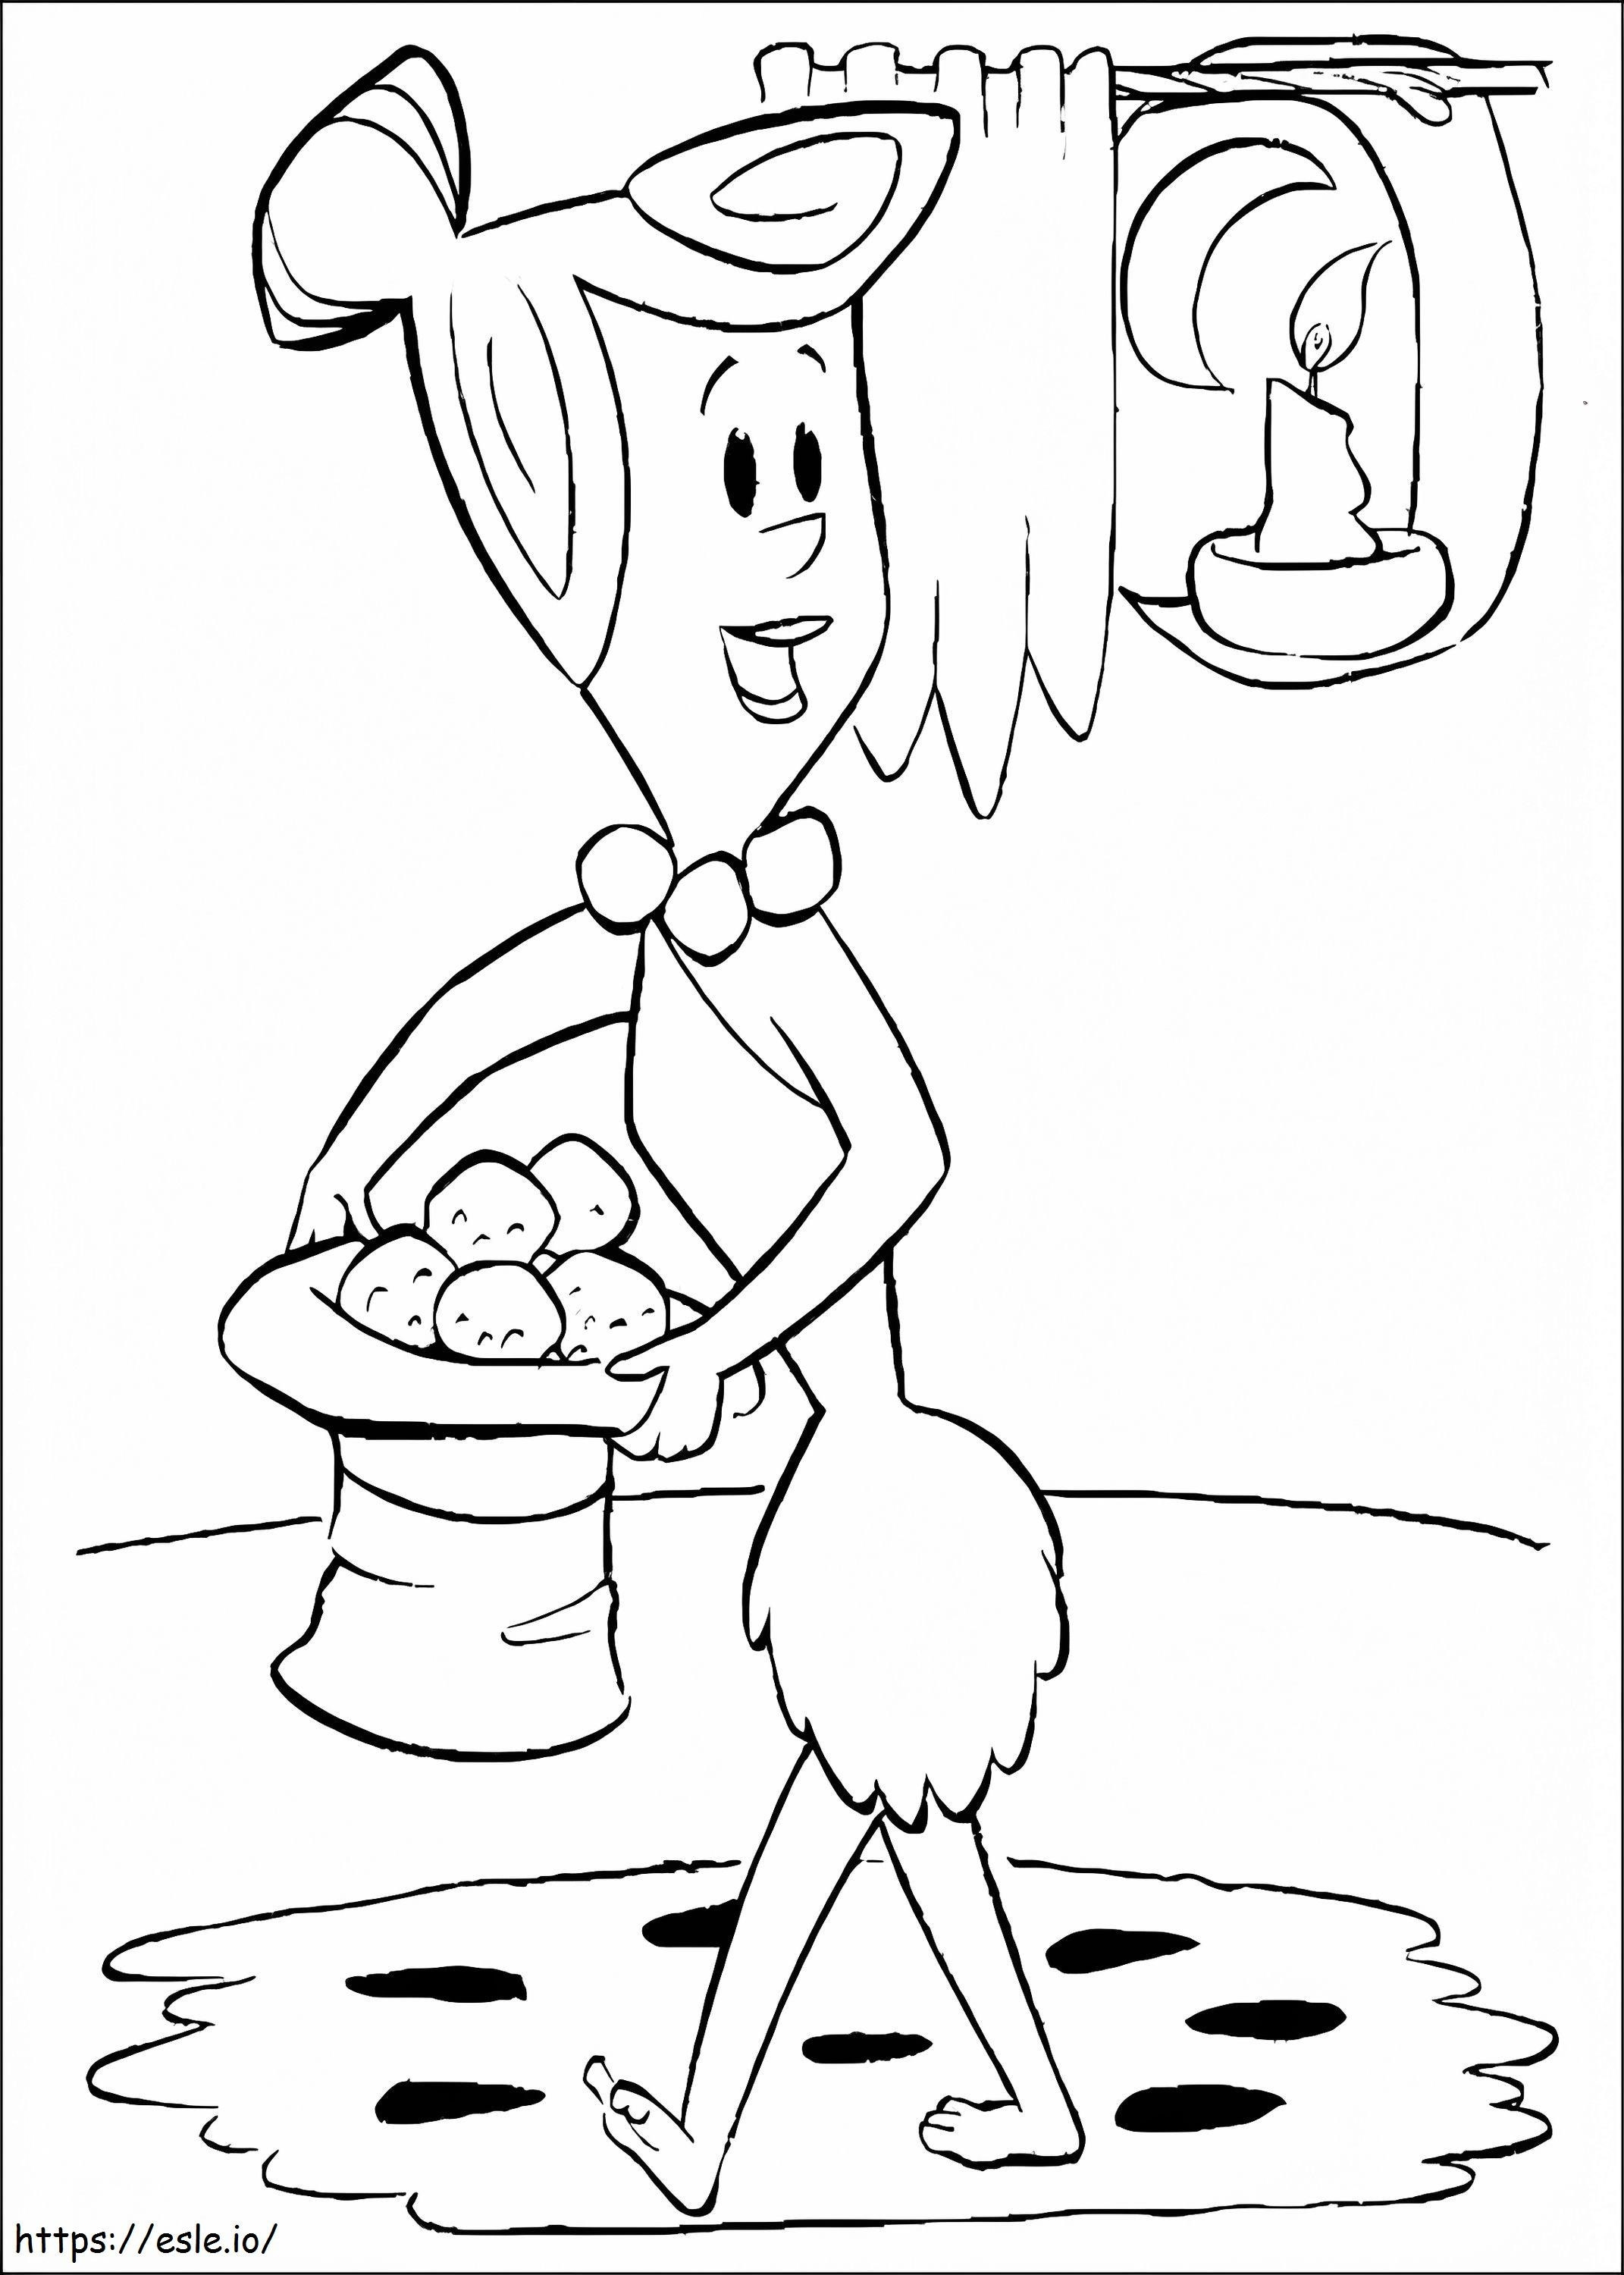 Wilma From The Flintstones coloring page